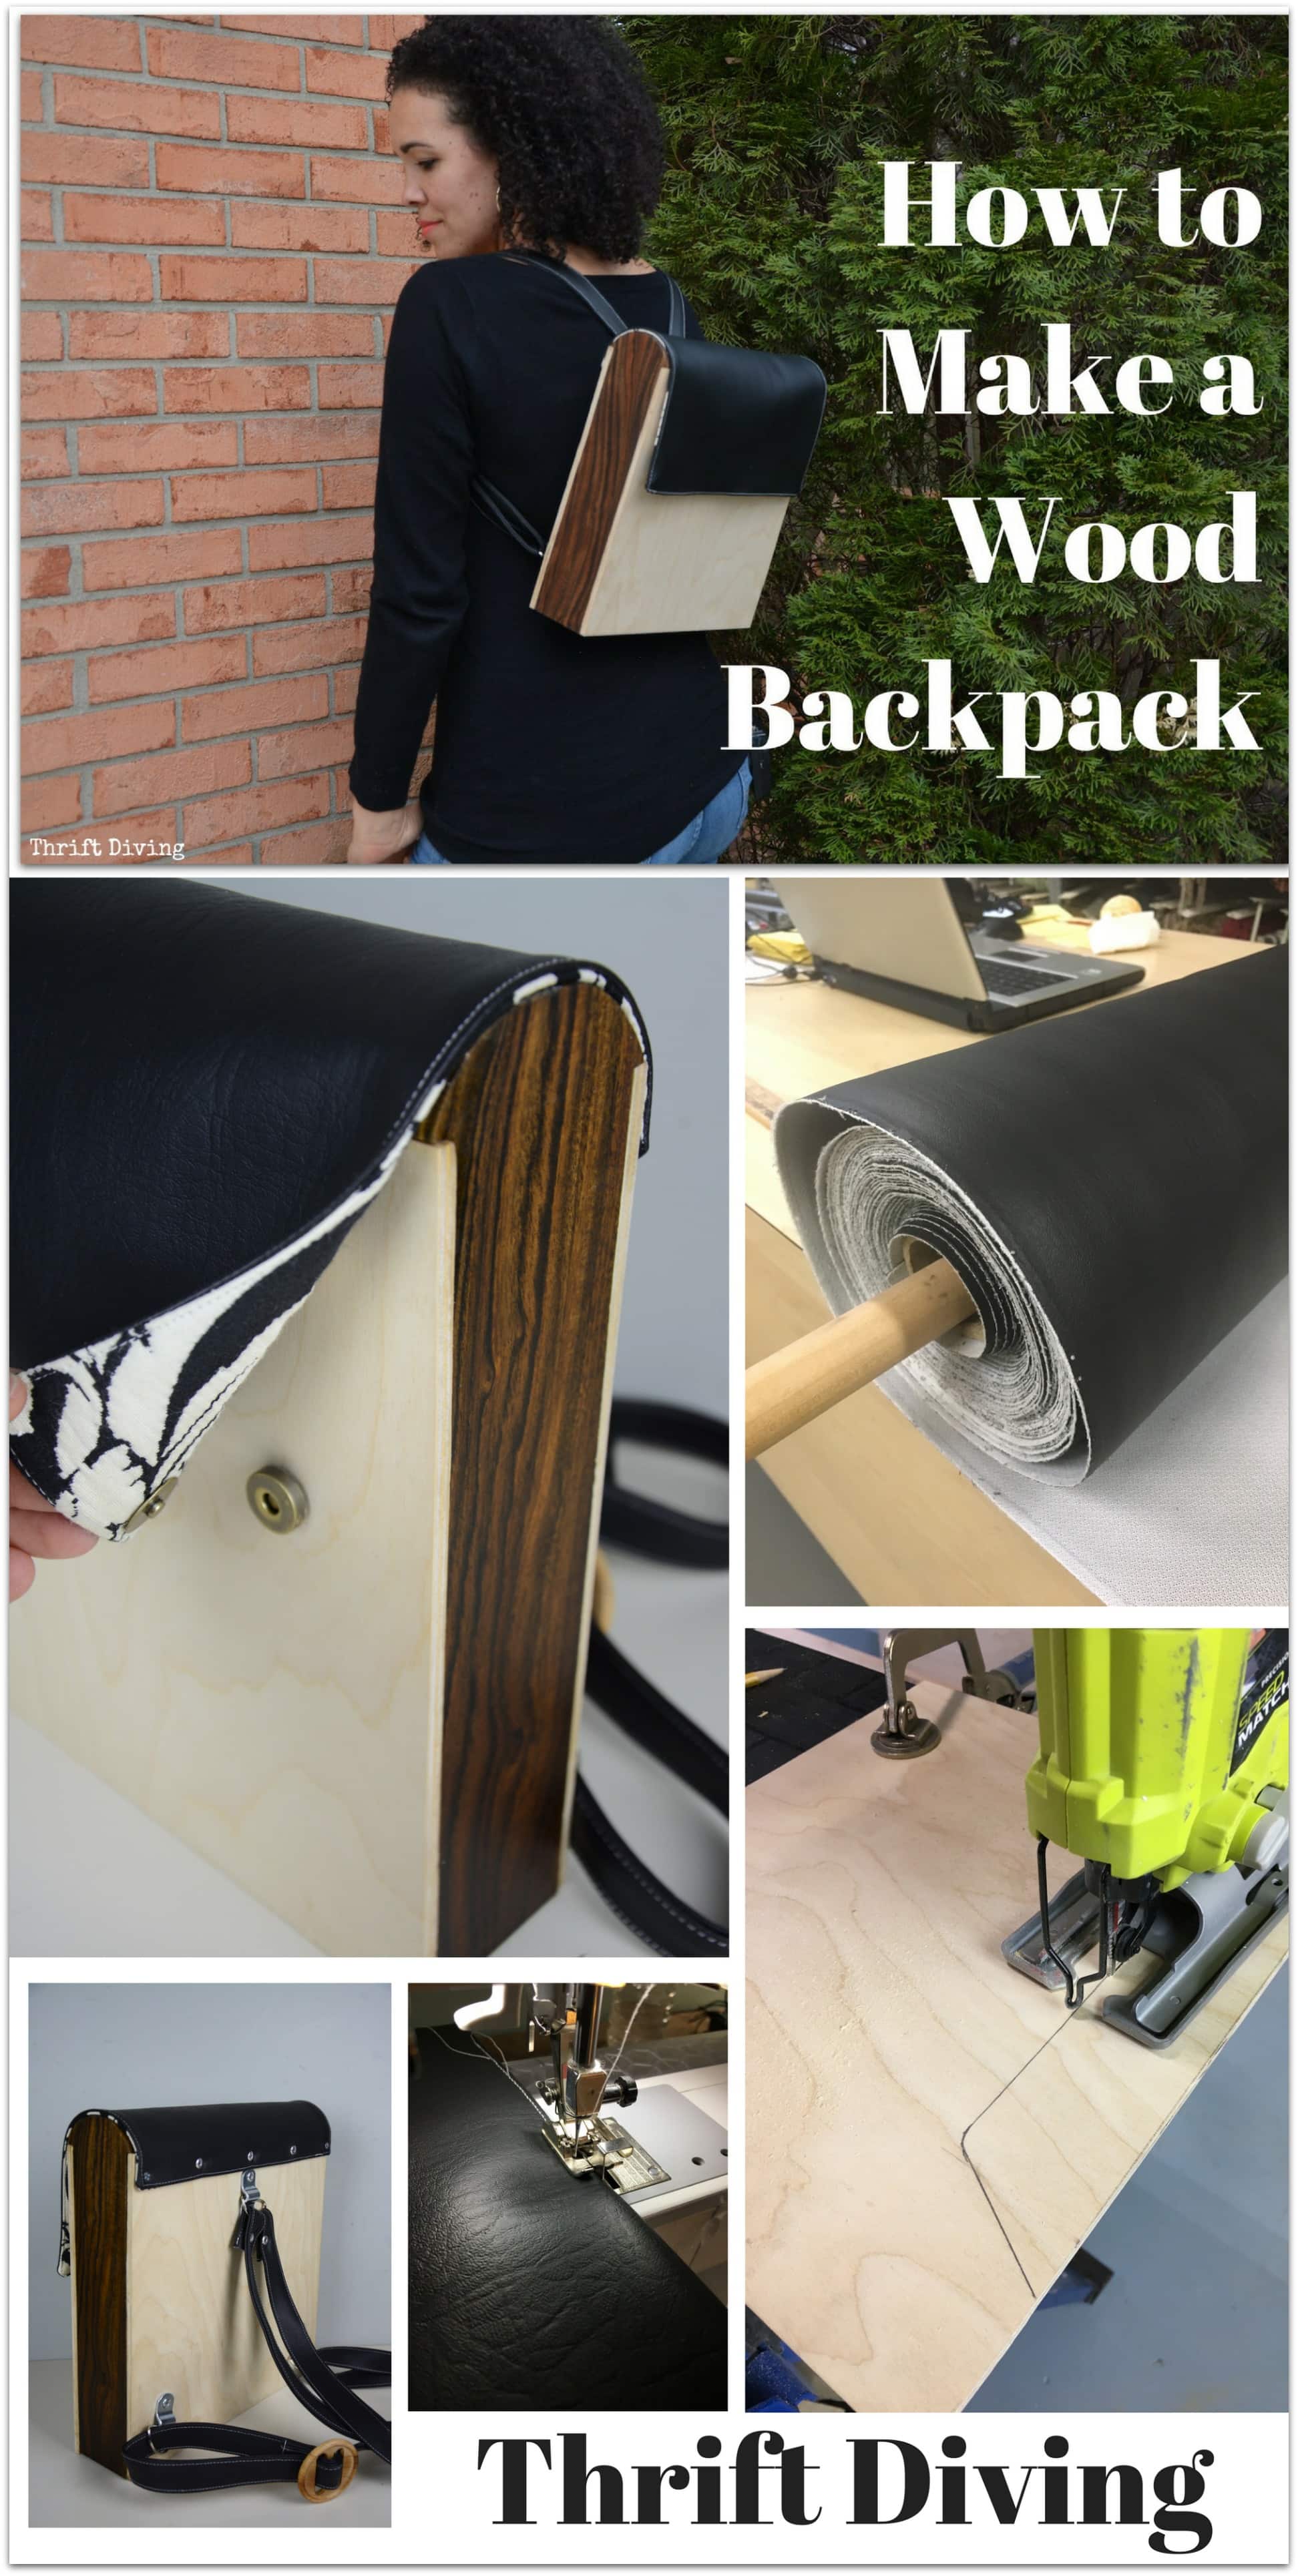 How to Make a Wood Backpack - Materials needed include plywood, exotic wood, and faux leather. See the full video tutorial - Thr